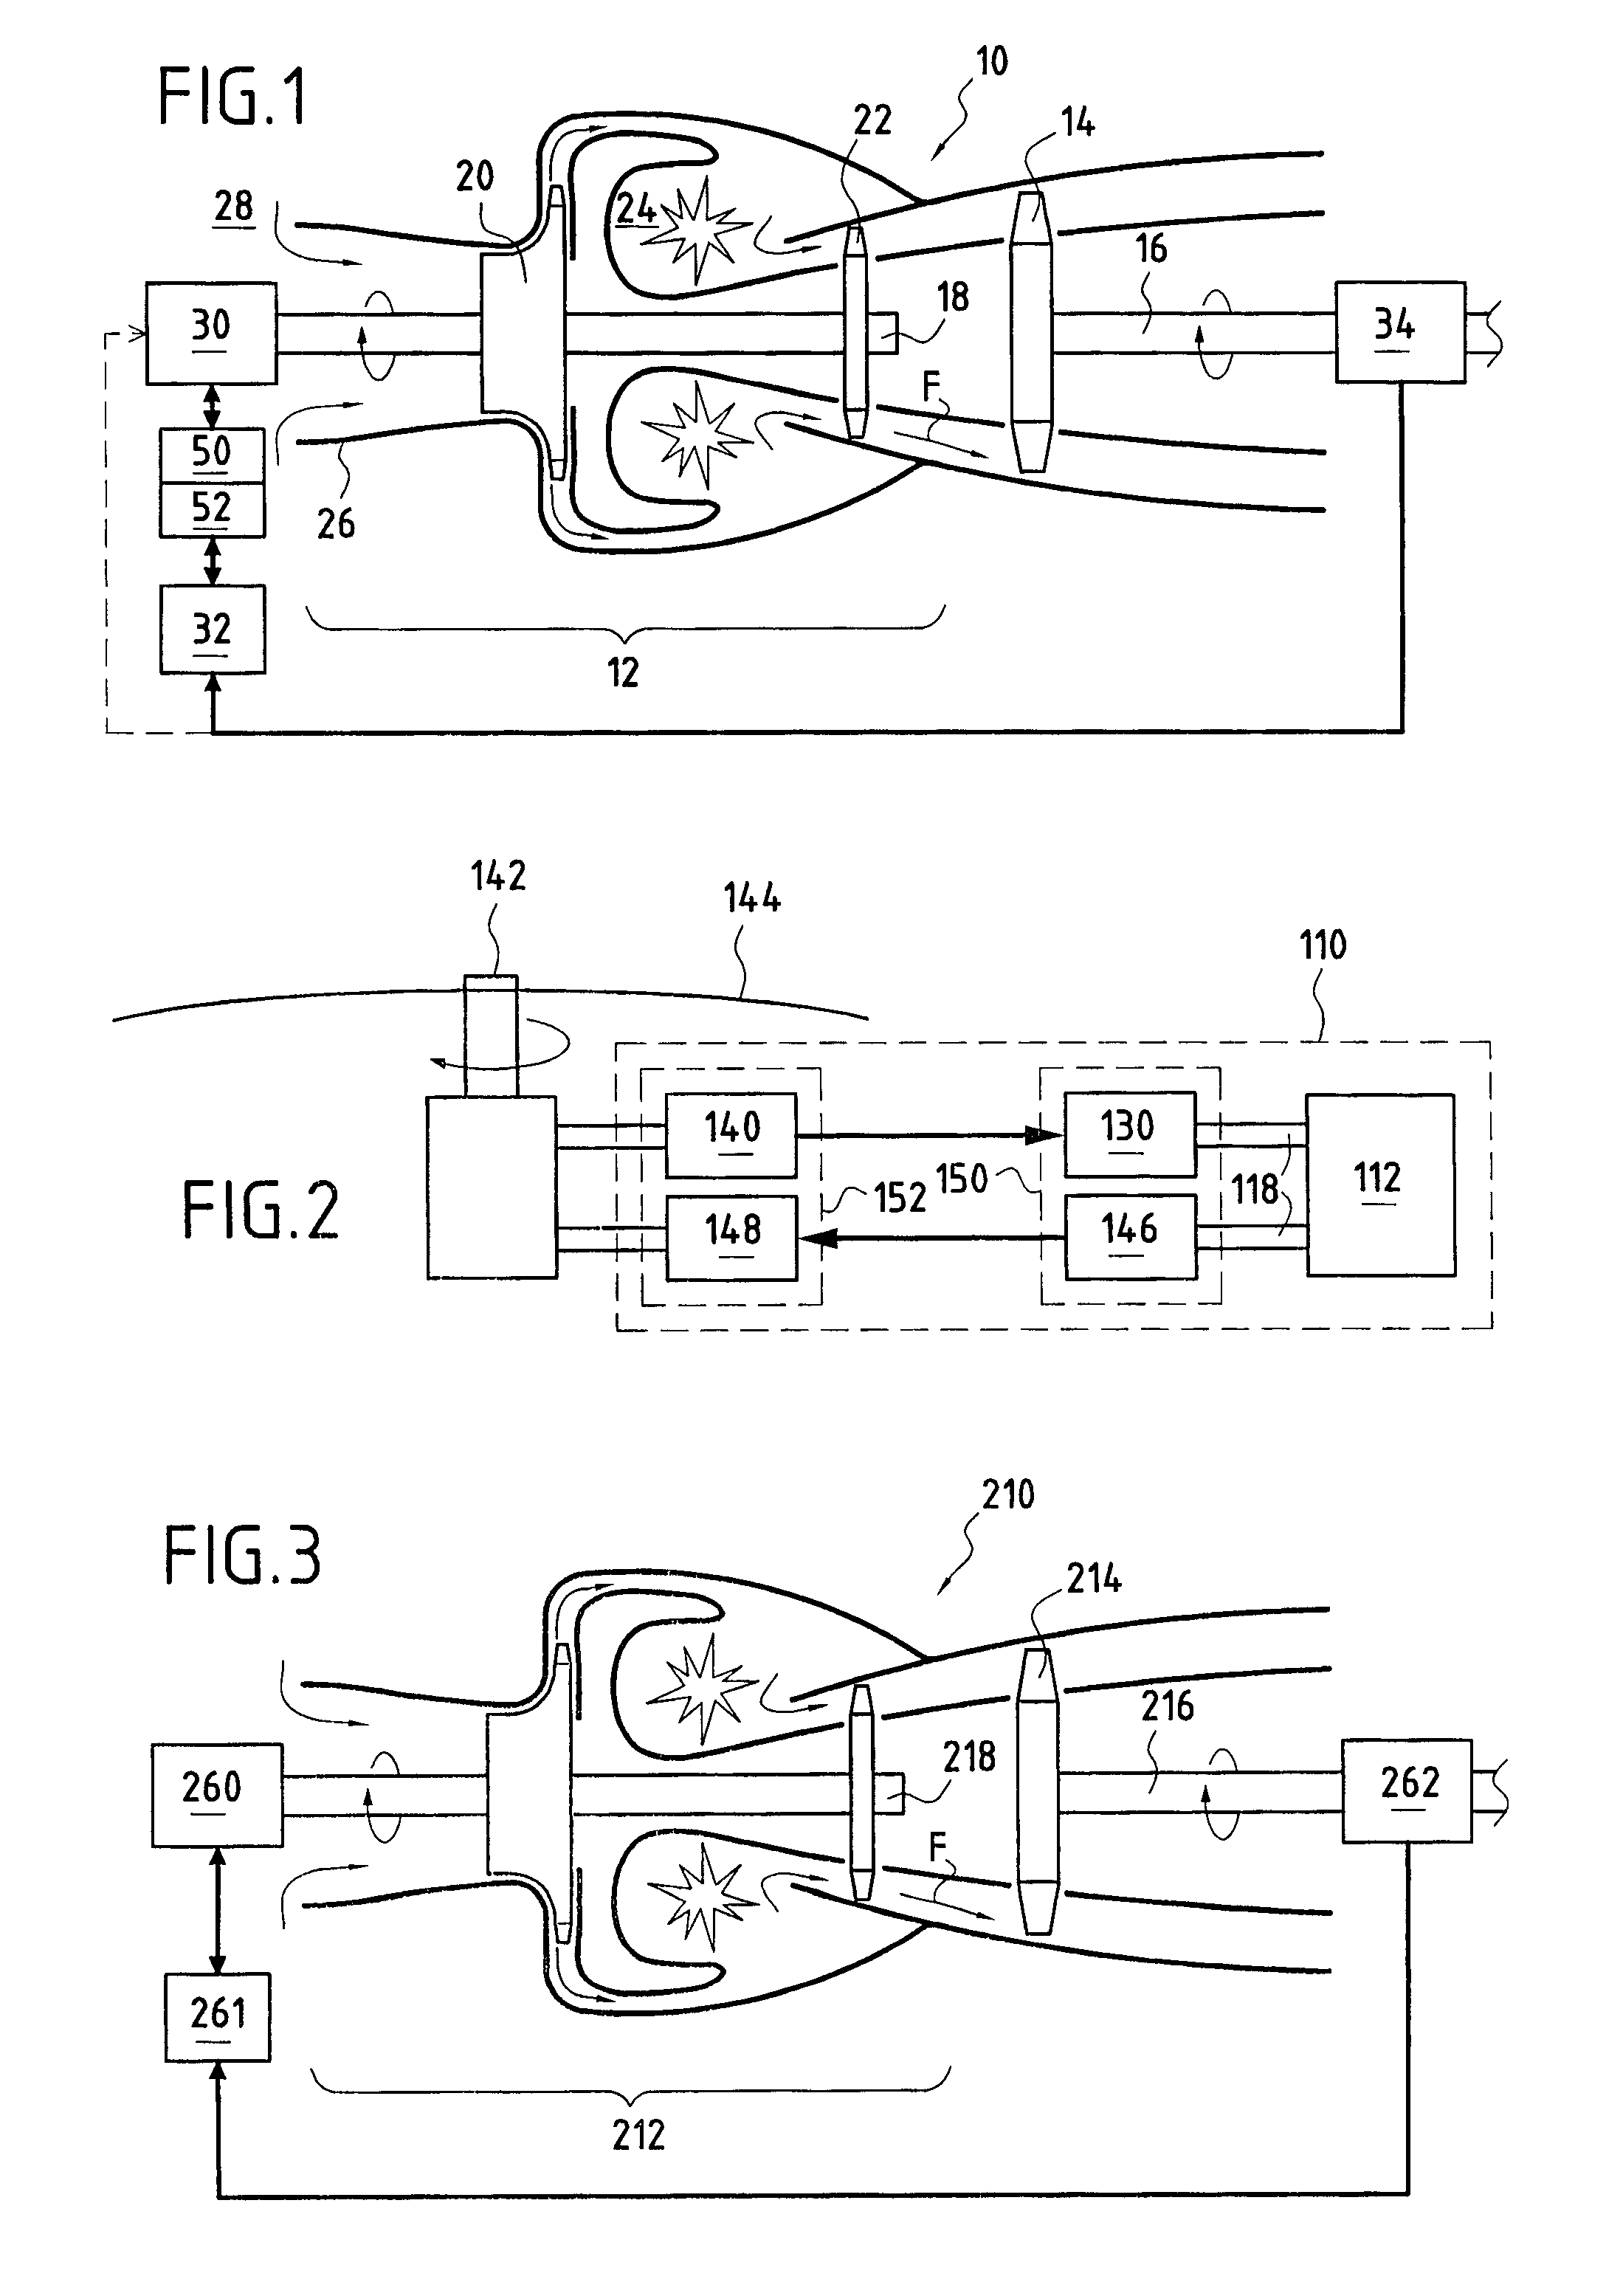 Assistance device for transient acceleration and deceleration phases